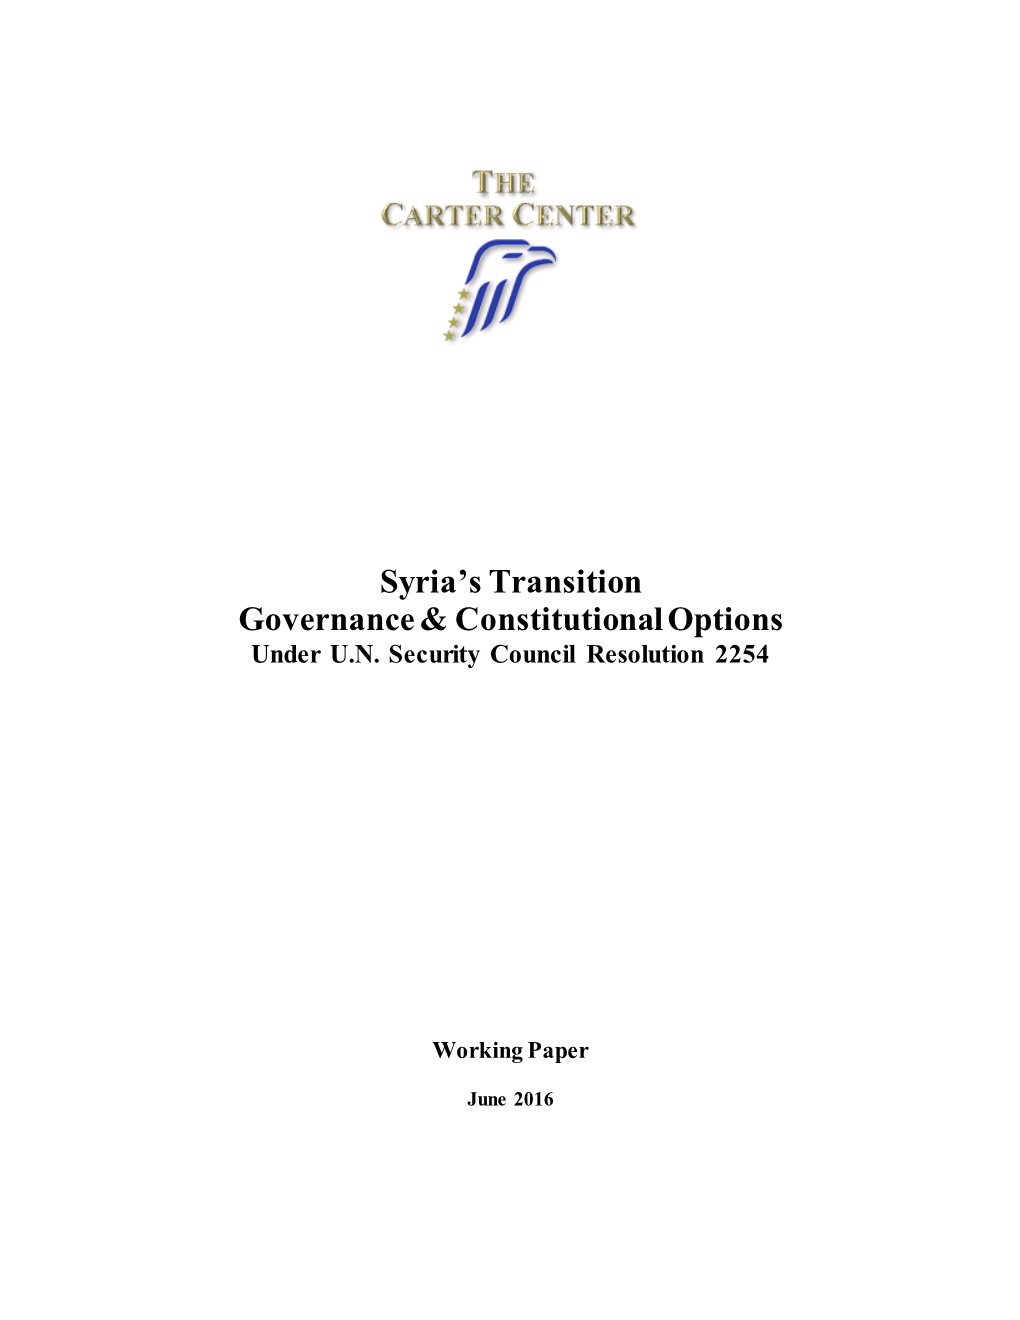 Syria's Transition Governance & Constitutional Options